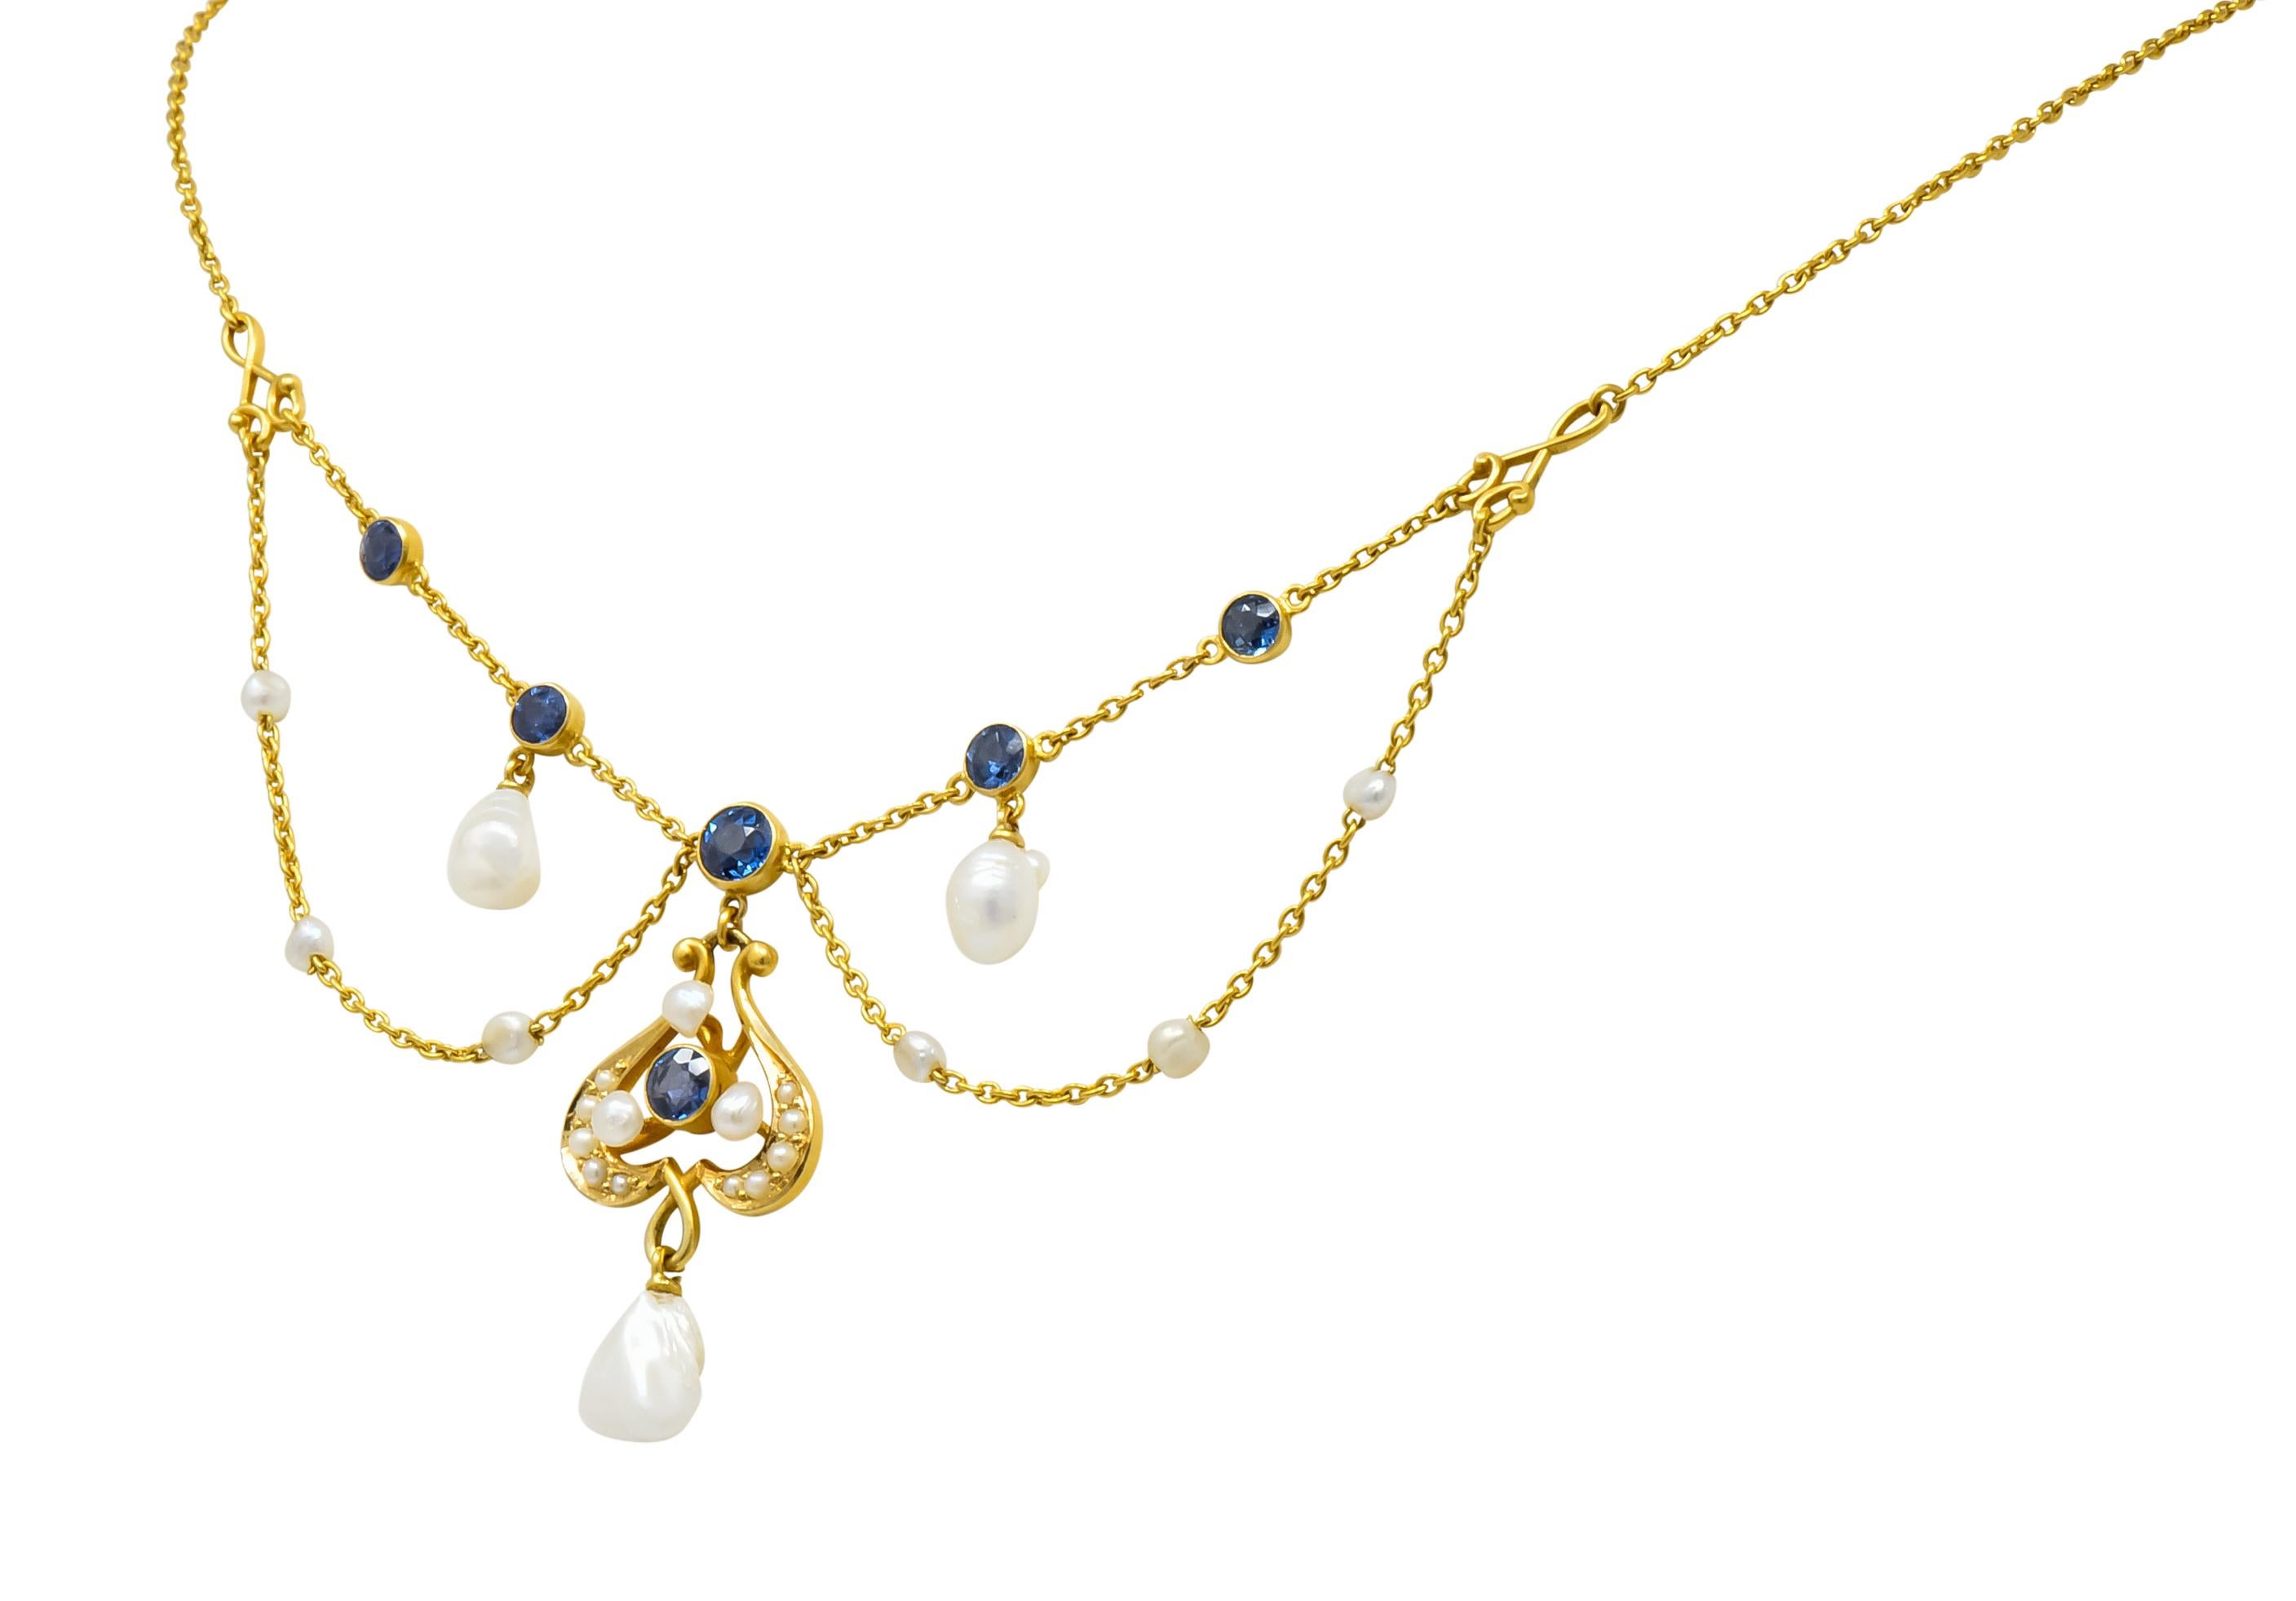 Swag style necklace featuring six bezel set round cut sapphire, transparent and medium-dark in color

With a stylized drop accented by natural seed pearls and three natural baroque pearl drops

Completed by cable chain and spring ring